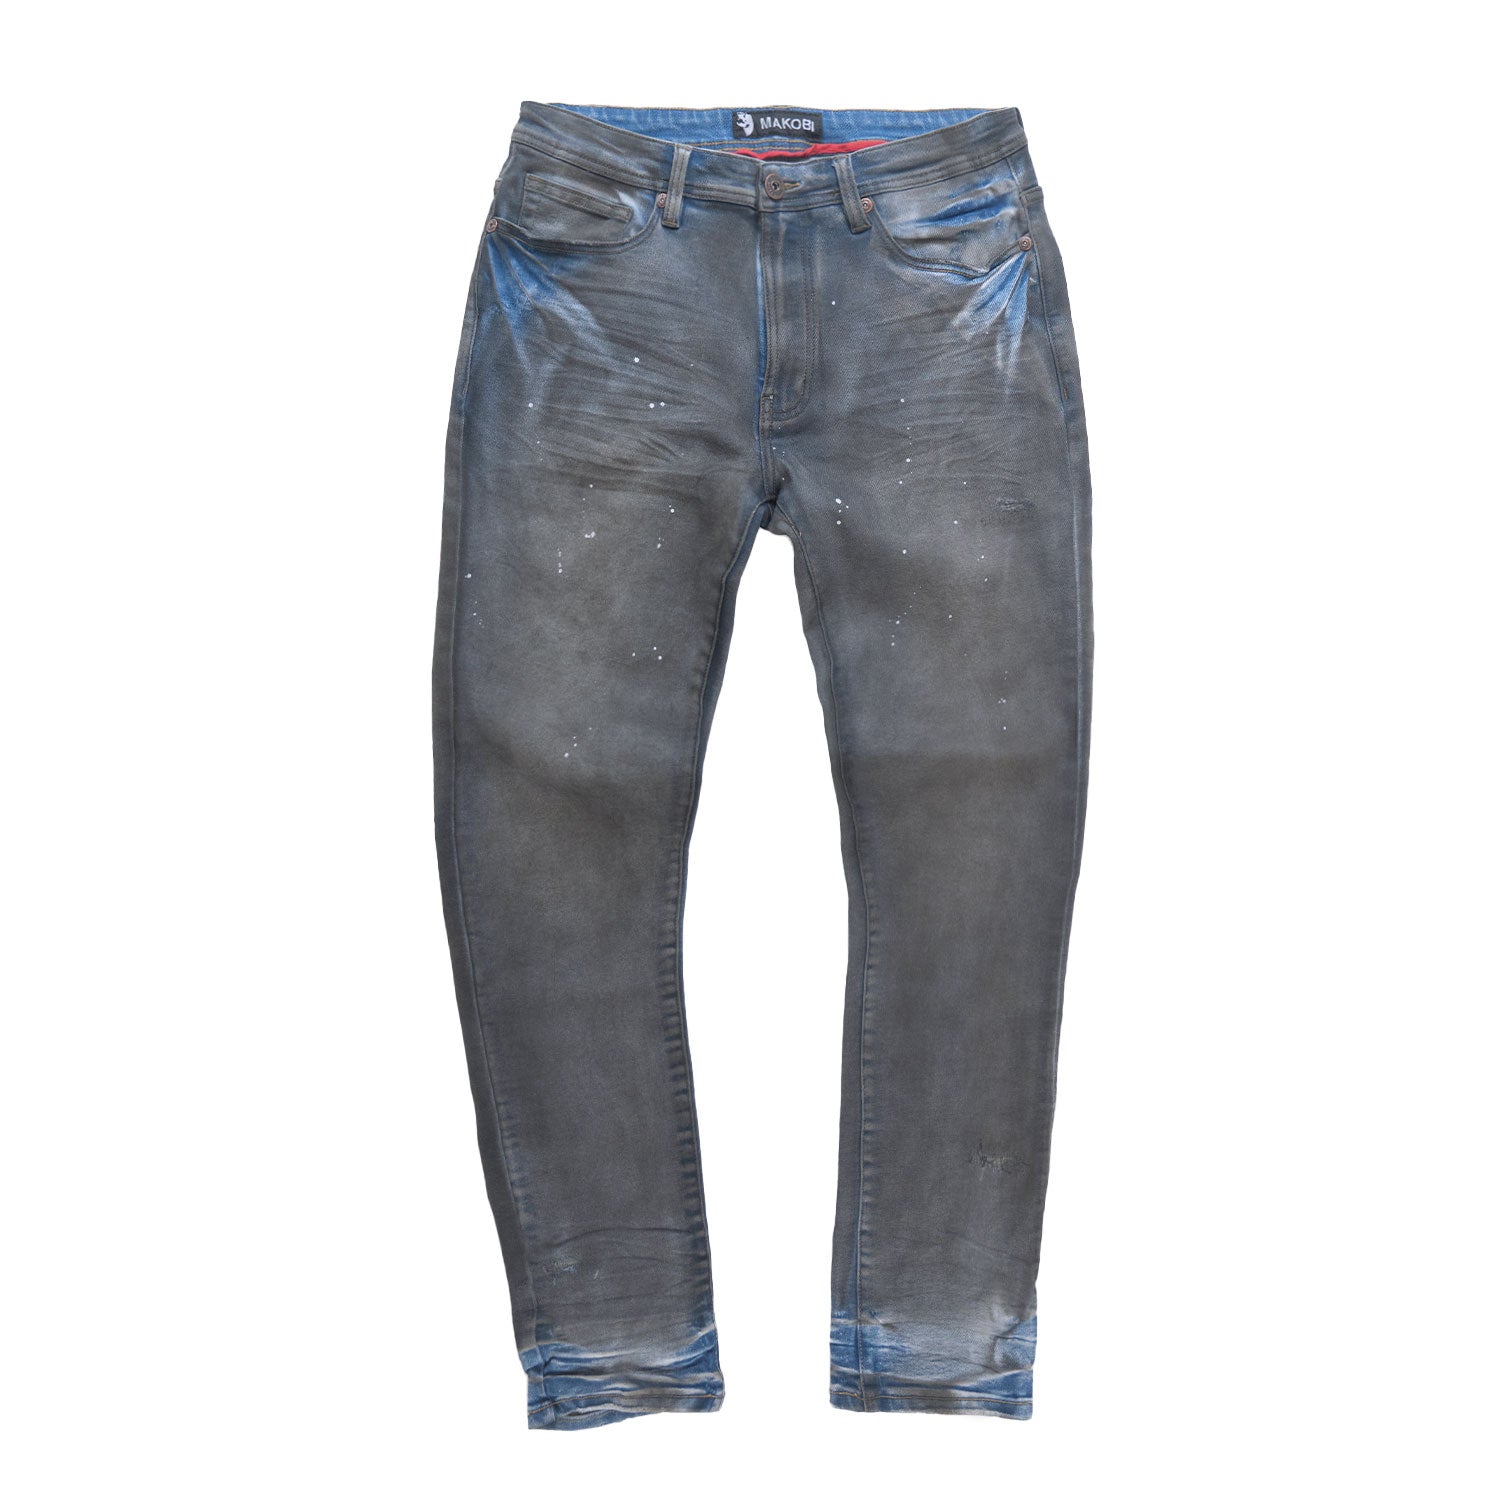 M1991 Avenida Greased Jeans - Grease Wash